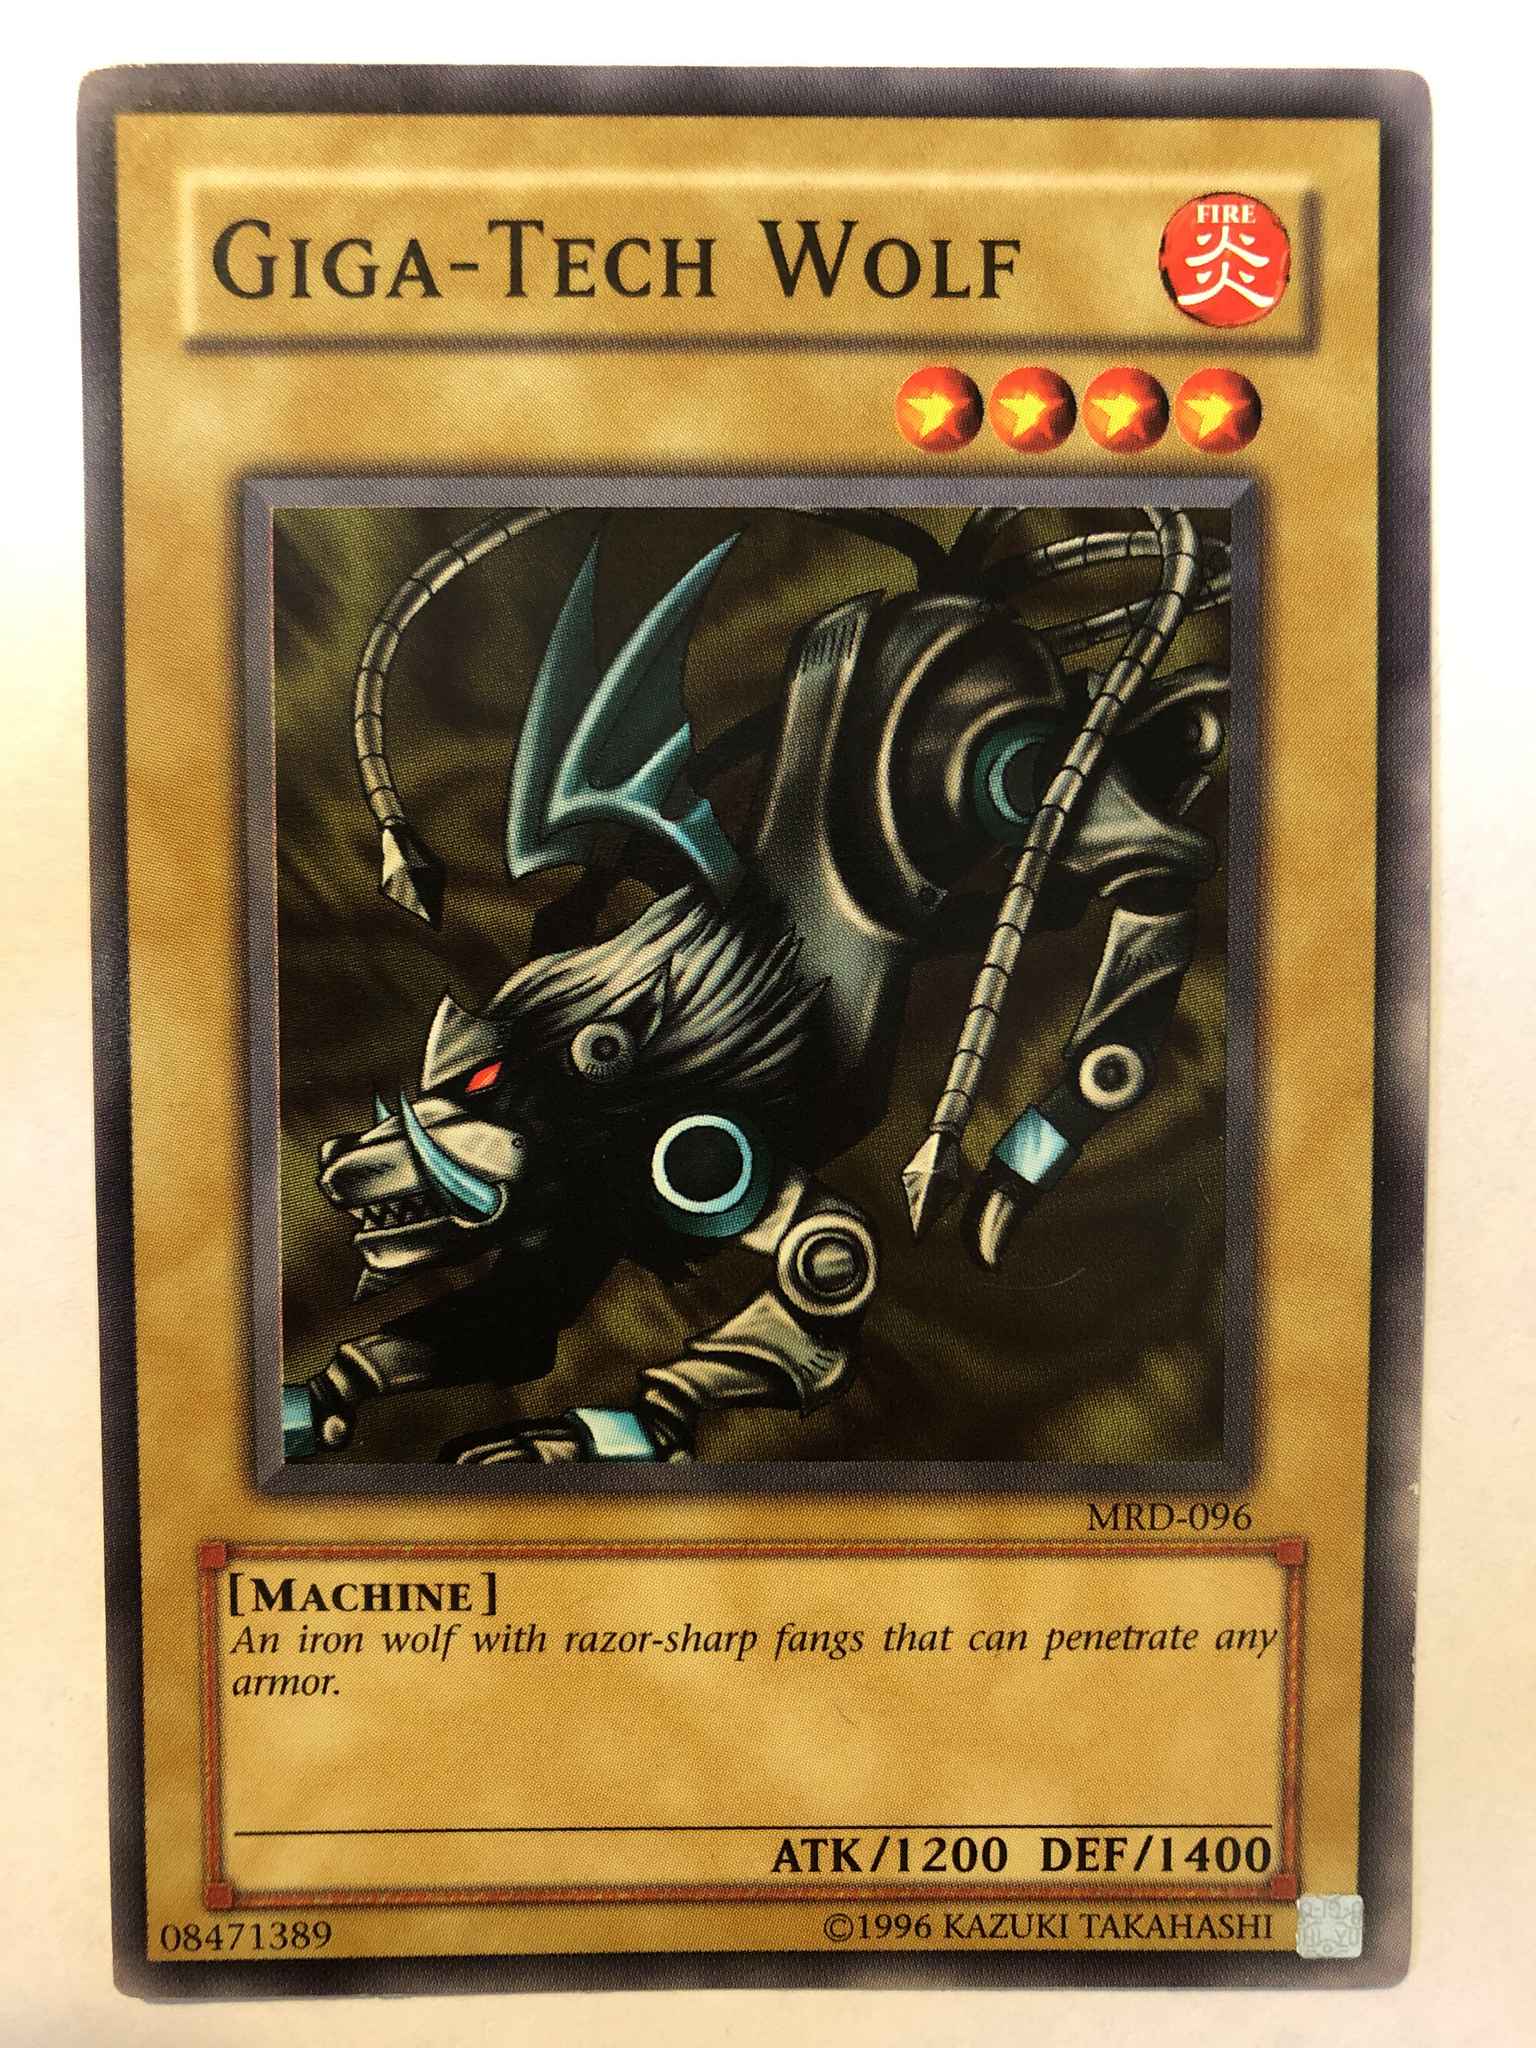 Giga Tech Wolf Giga Tech Wolf Metal Raiders Yugioh Online Gaming Store For Cards Miniatures Singles Packs Booster Boxes